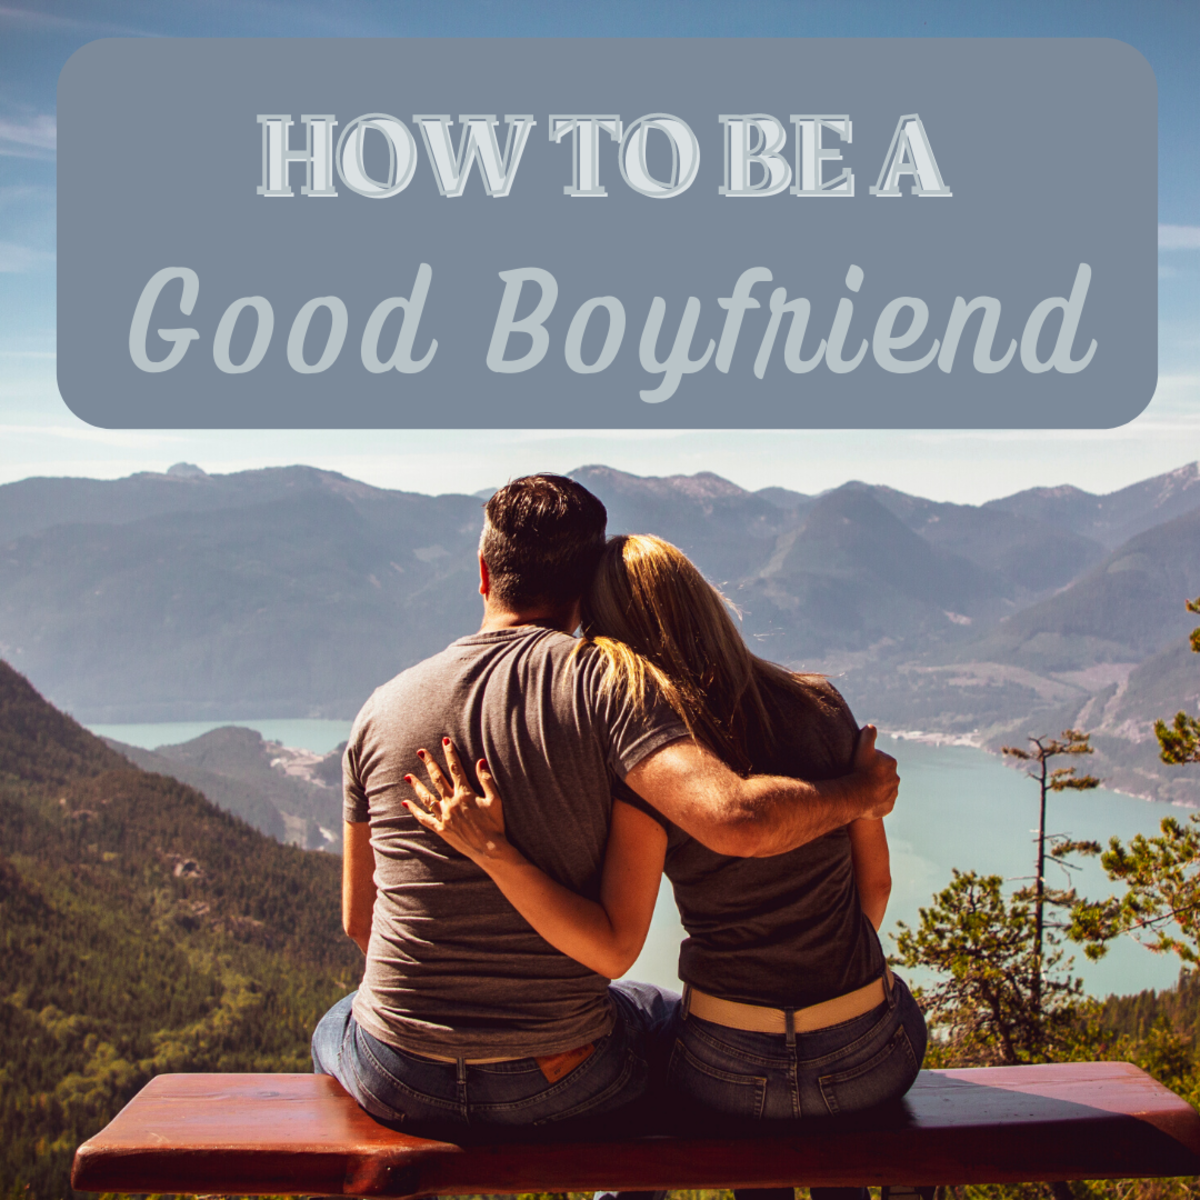 Want to be an amazing boyfriend? Here are 10 tips!